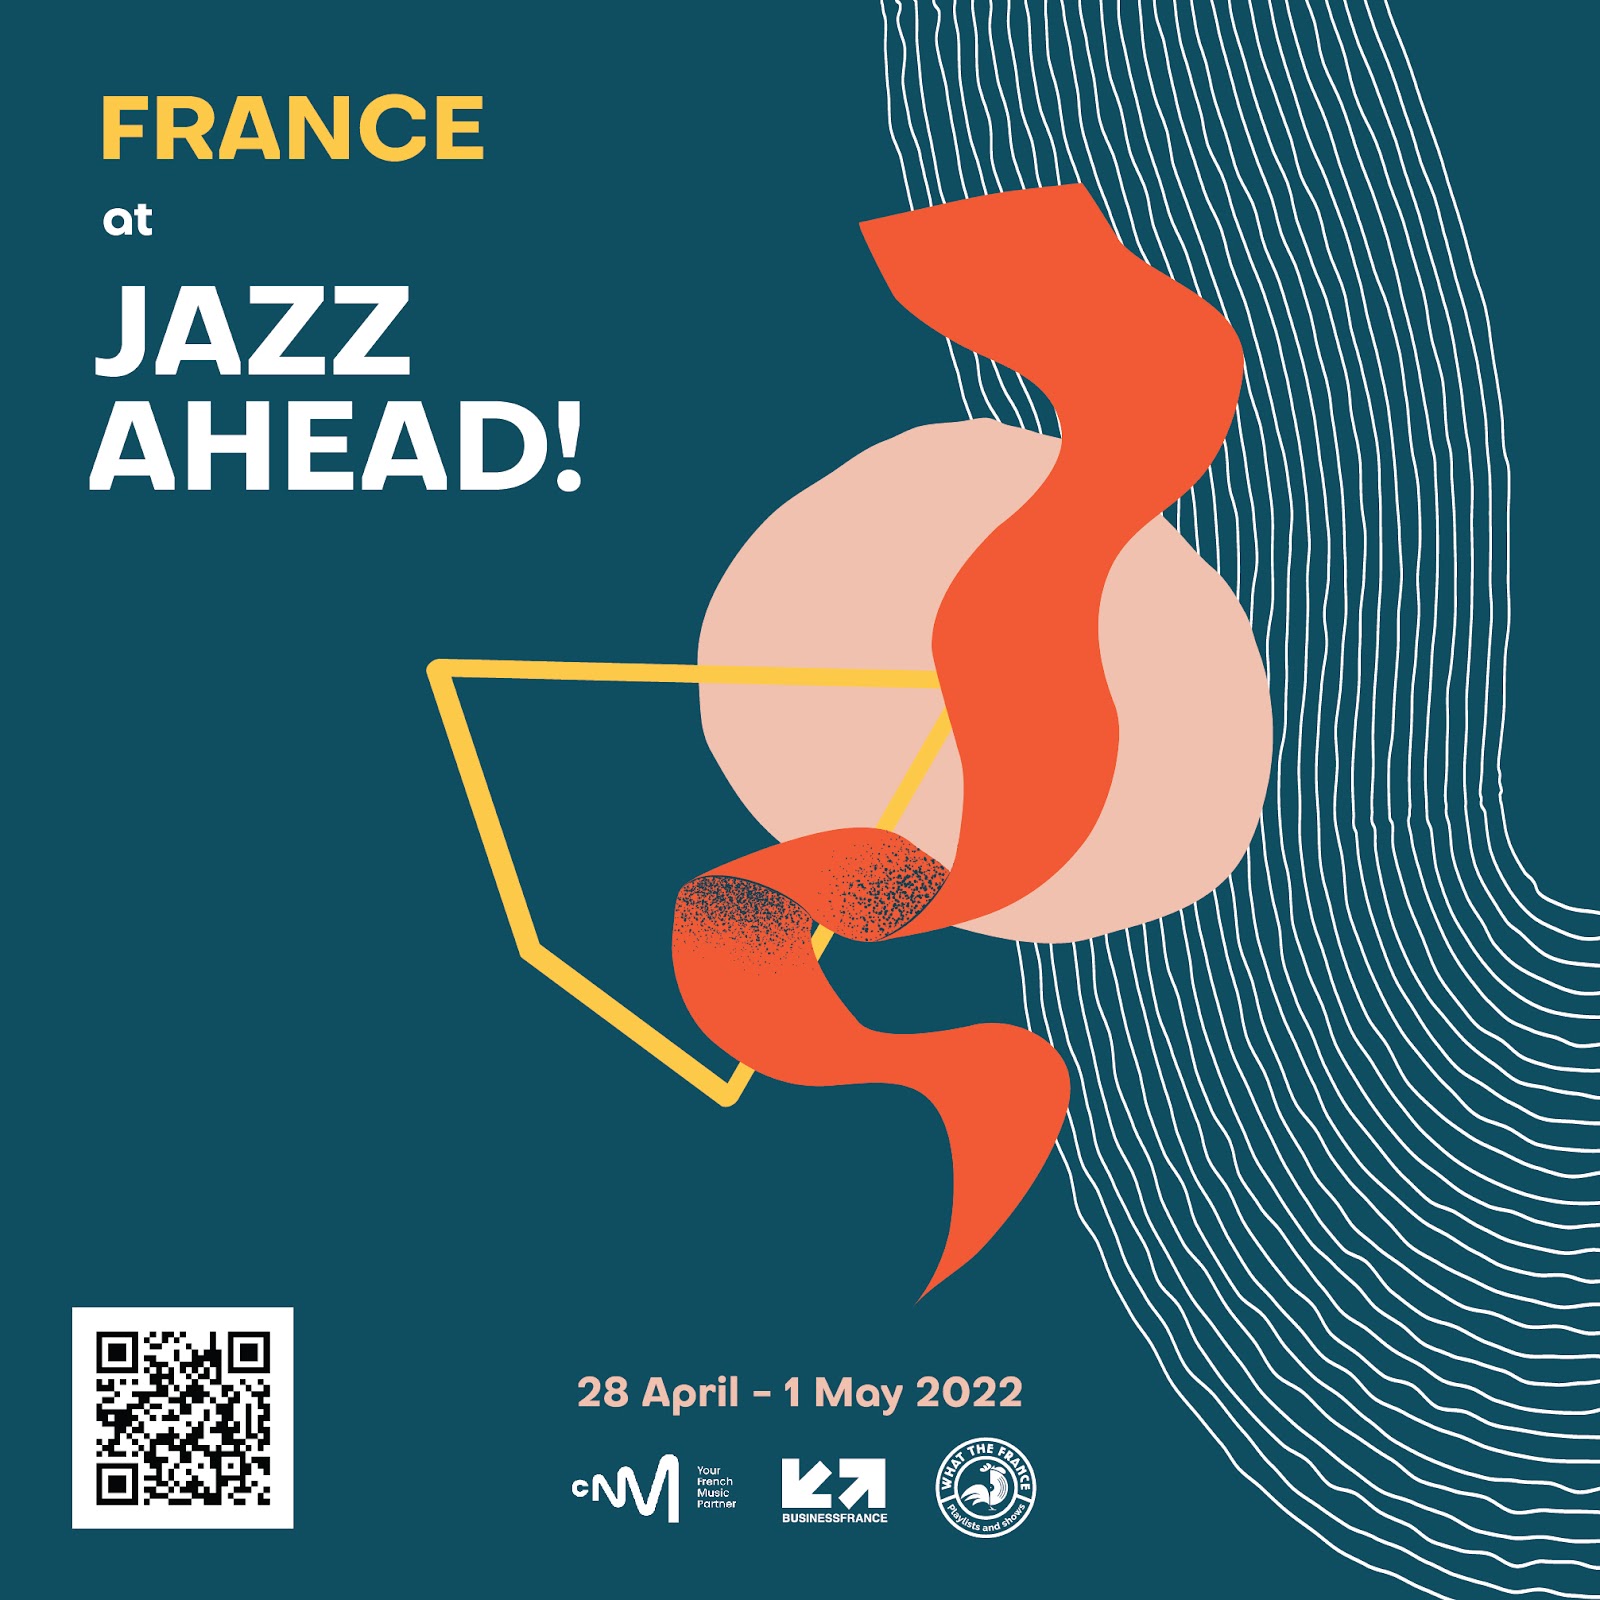 Playlist What the France - France at Jazzahead